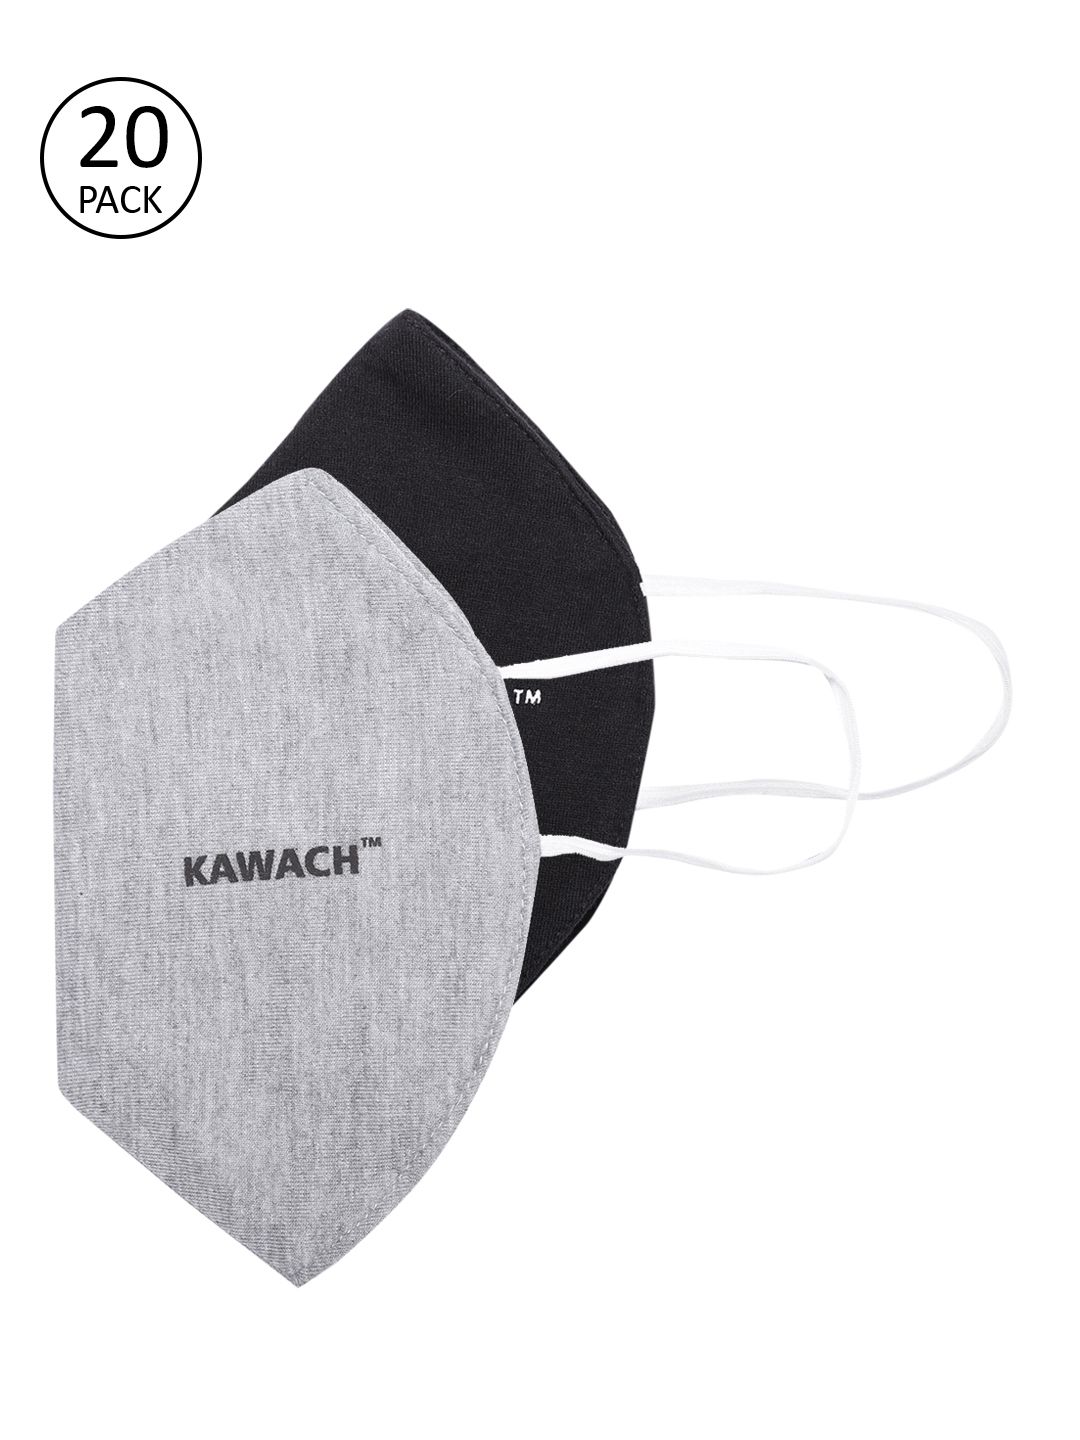 Kawach Unisex Pack of 20 Reusable 3-Ply Cotton Cloth Masks Price in India